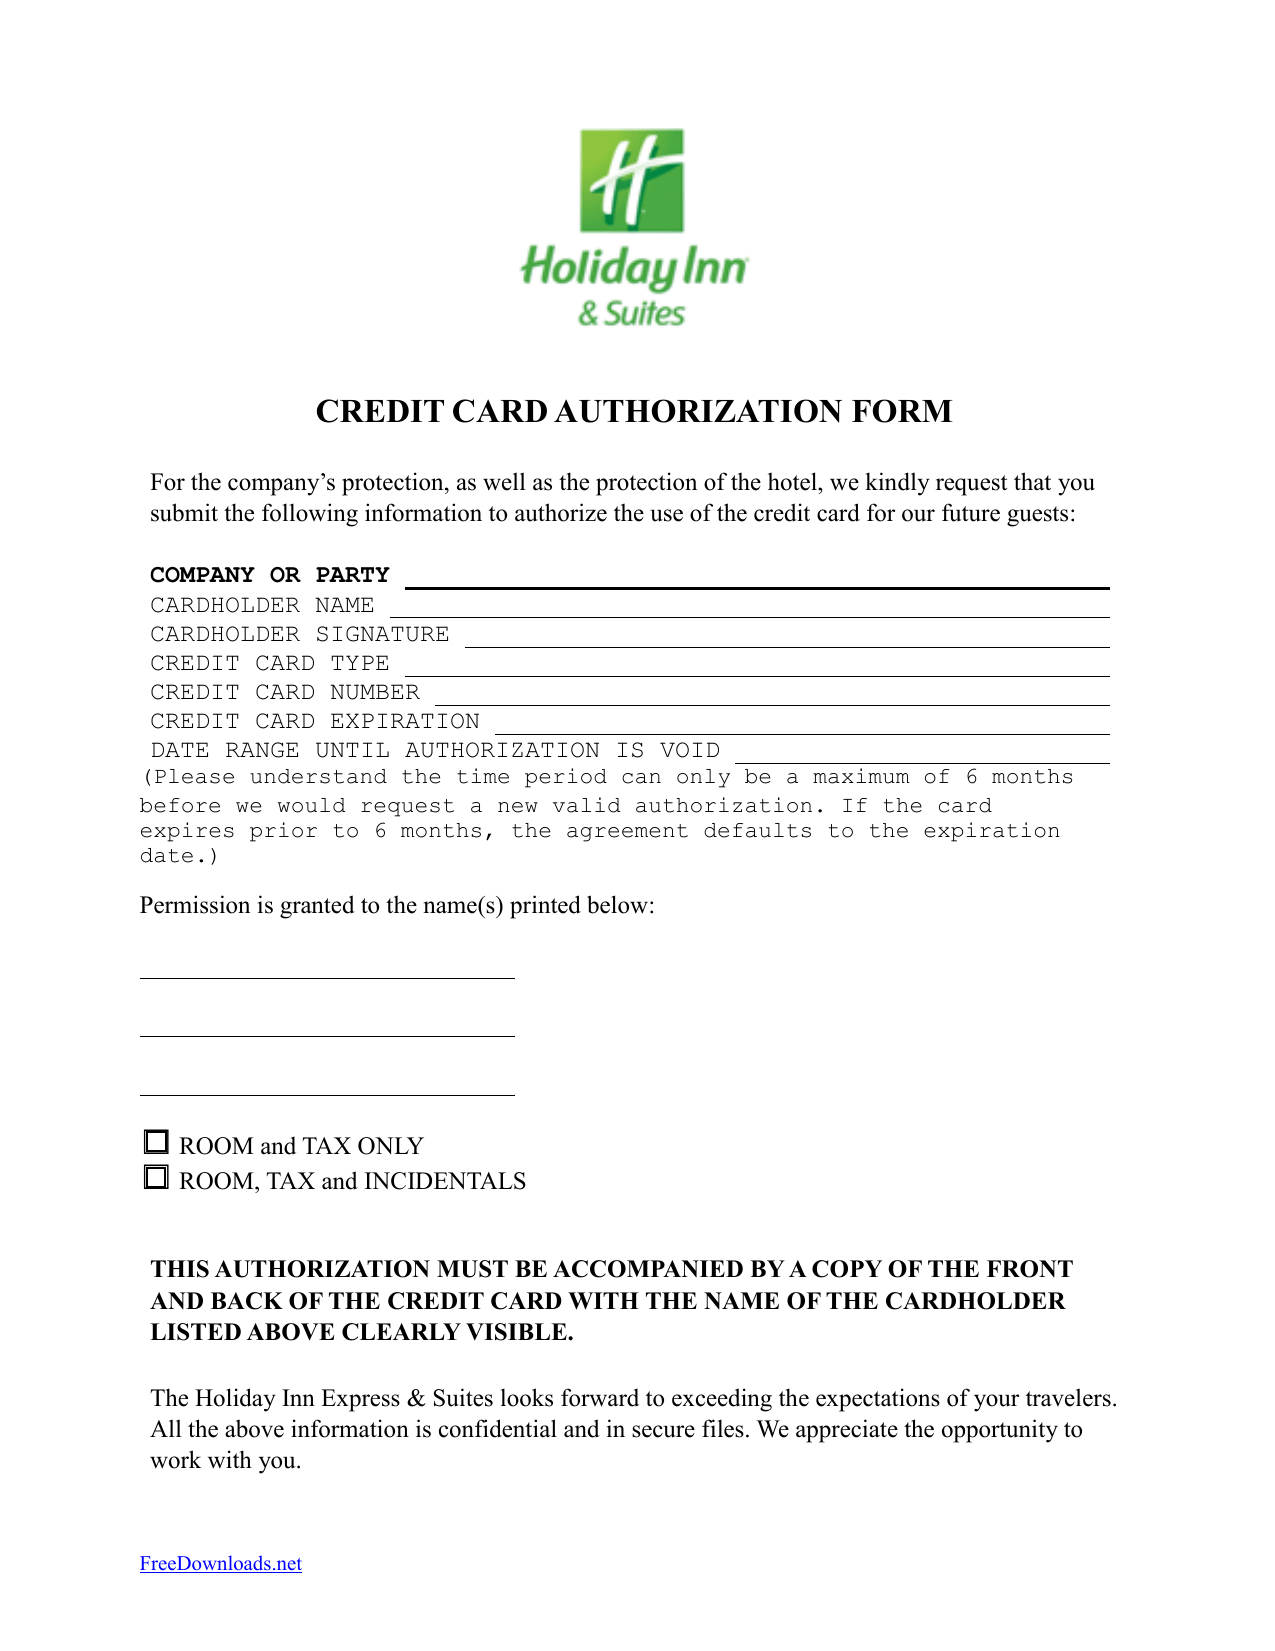 One Time Credit Card Authorization Form Throughout Hotel Credit Card Authorization Form Template